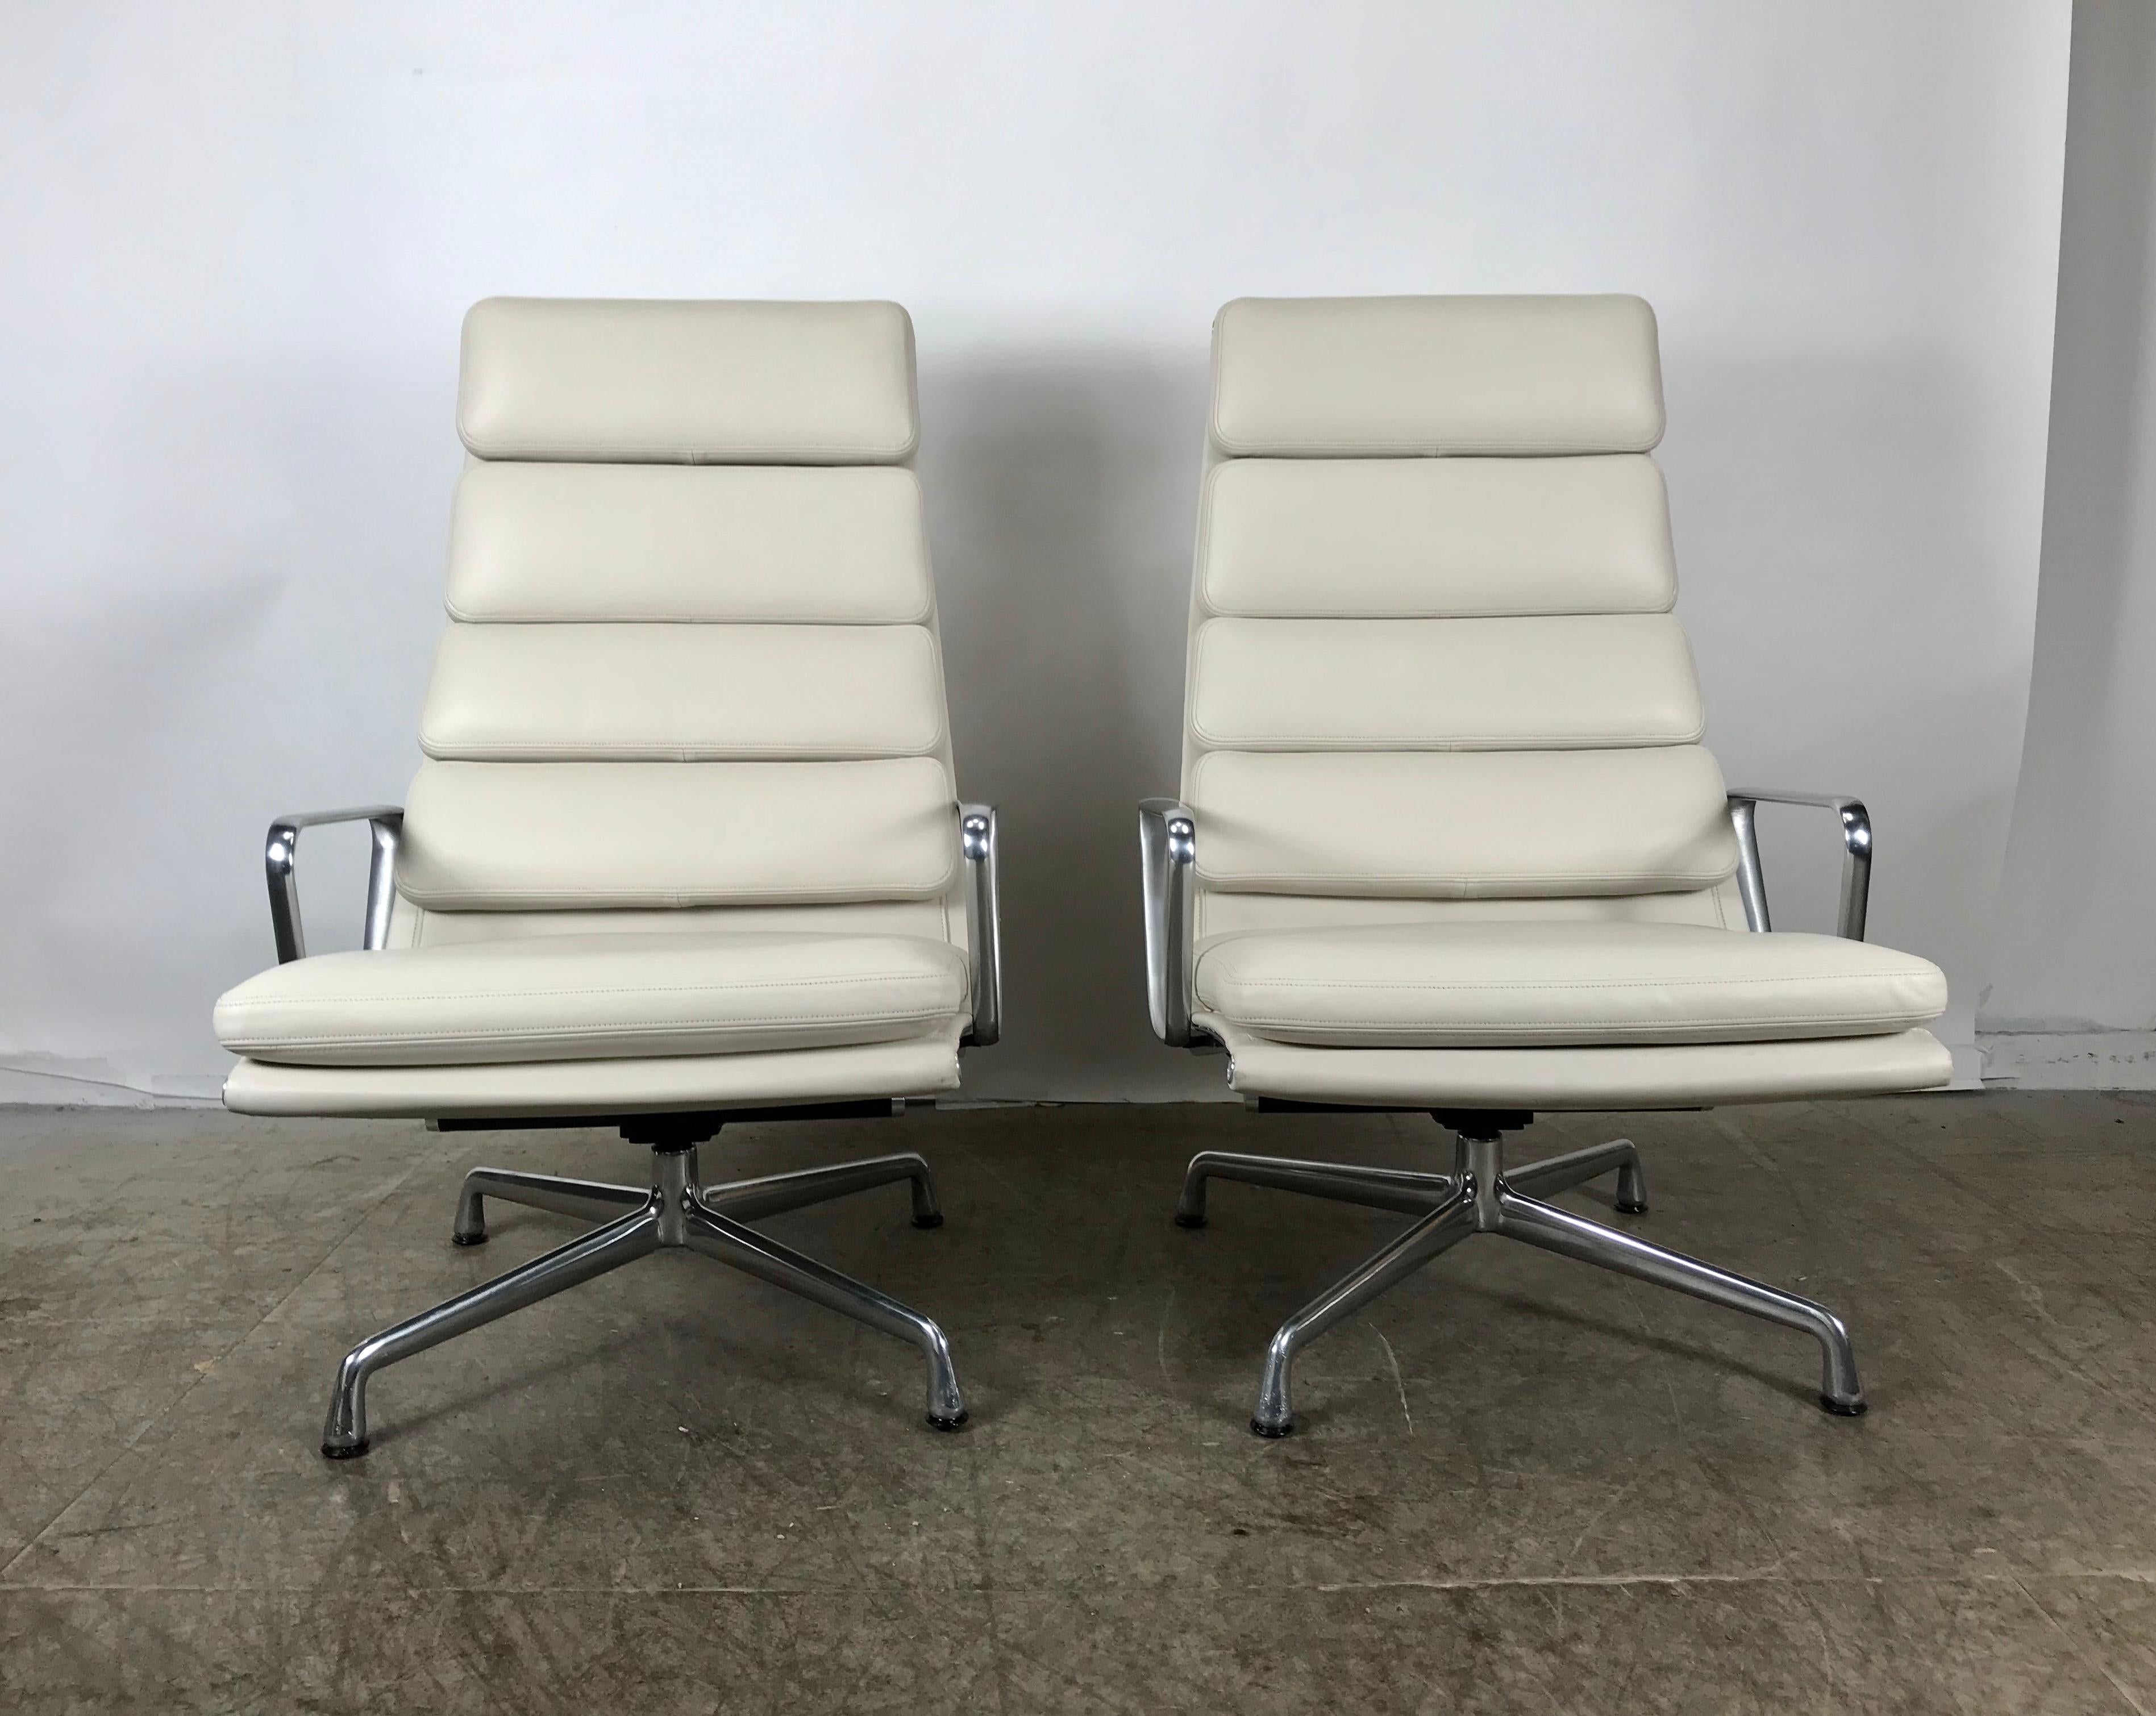 Leather and Aluminum Soft Pad Lounge Chairs, Charles Eames Herman Miller (Moderne der Mitte des Jahrhunderts)